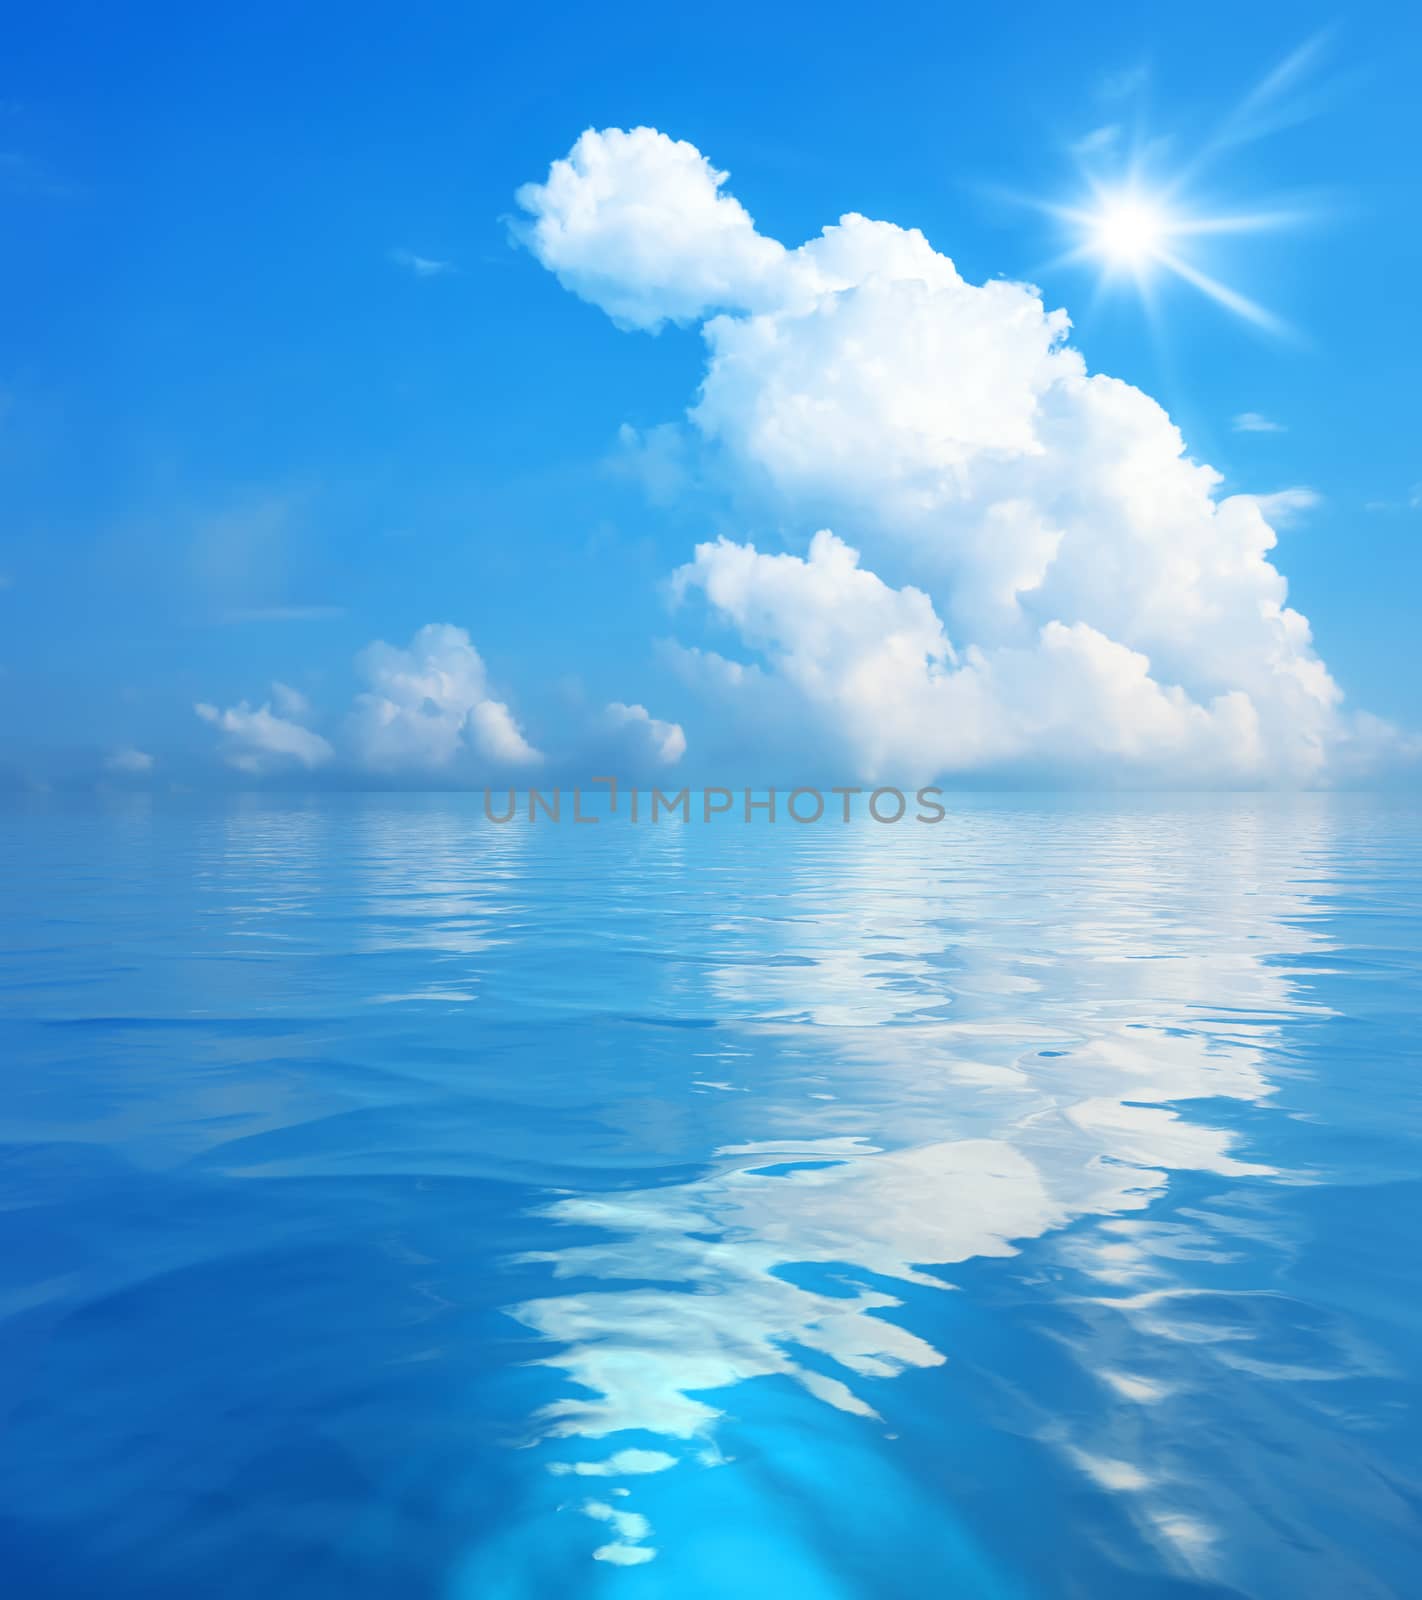 An image of the blue sky with white clouds and sun over the sea